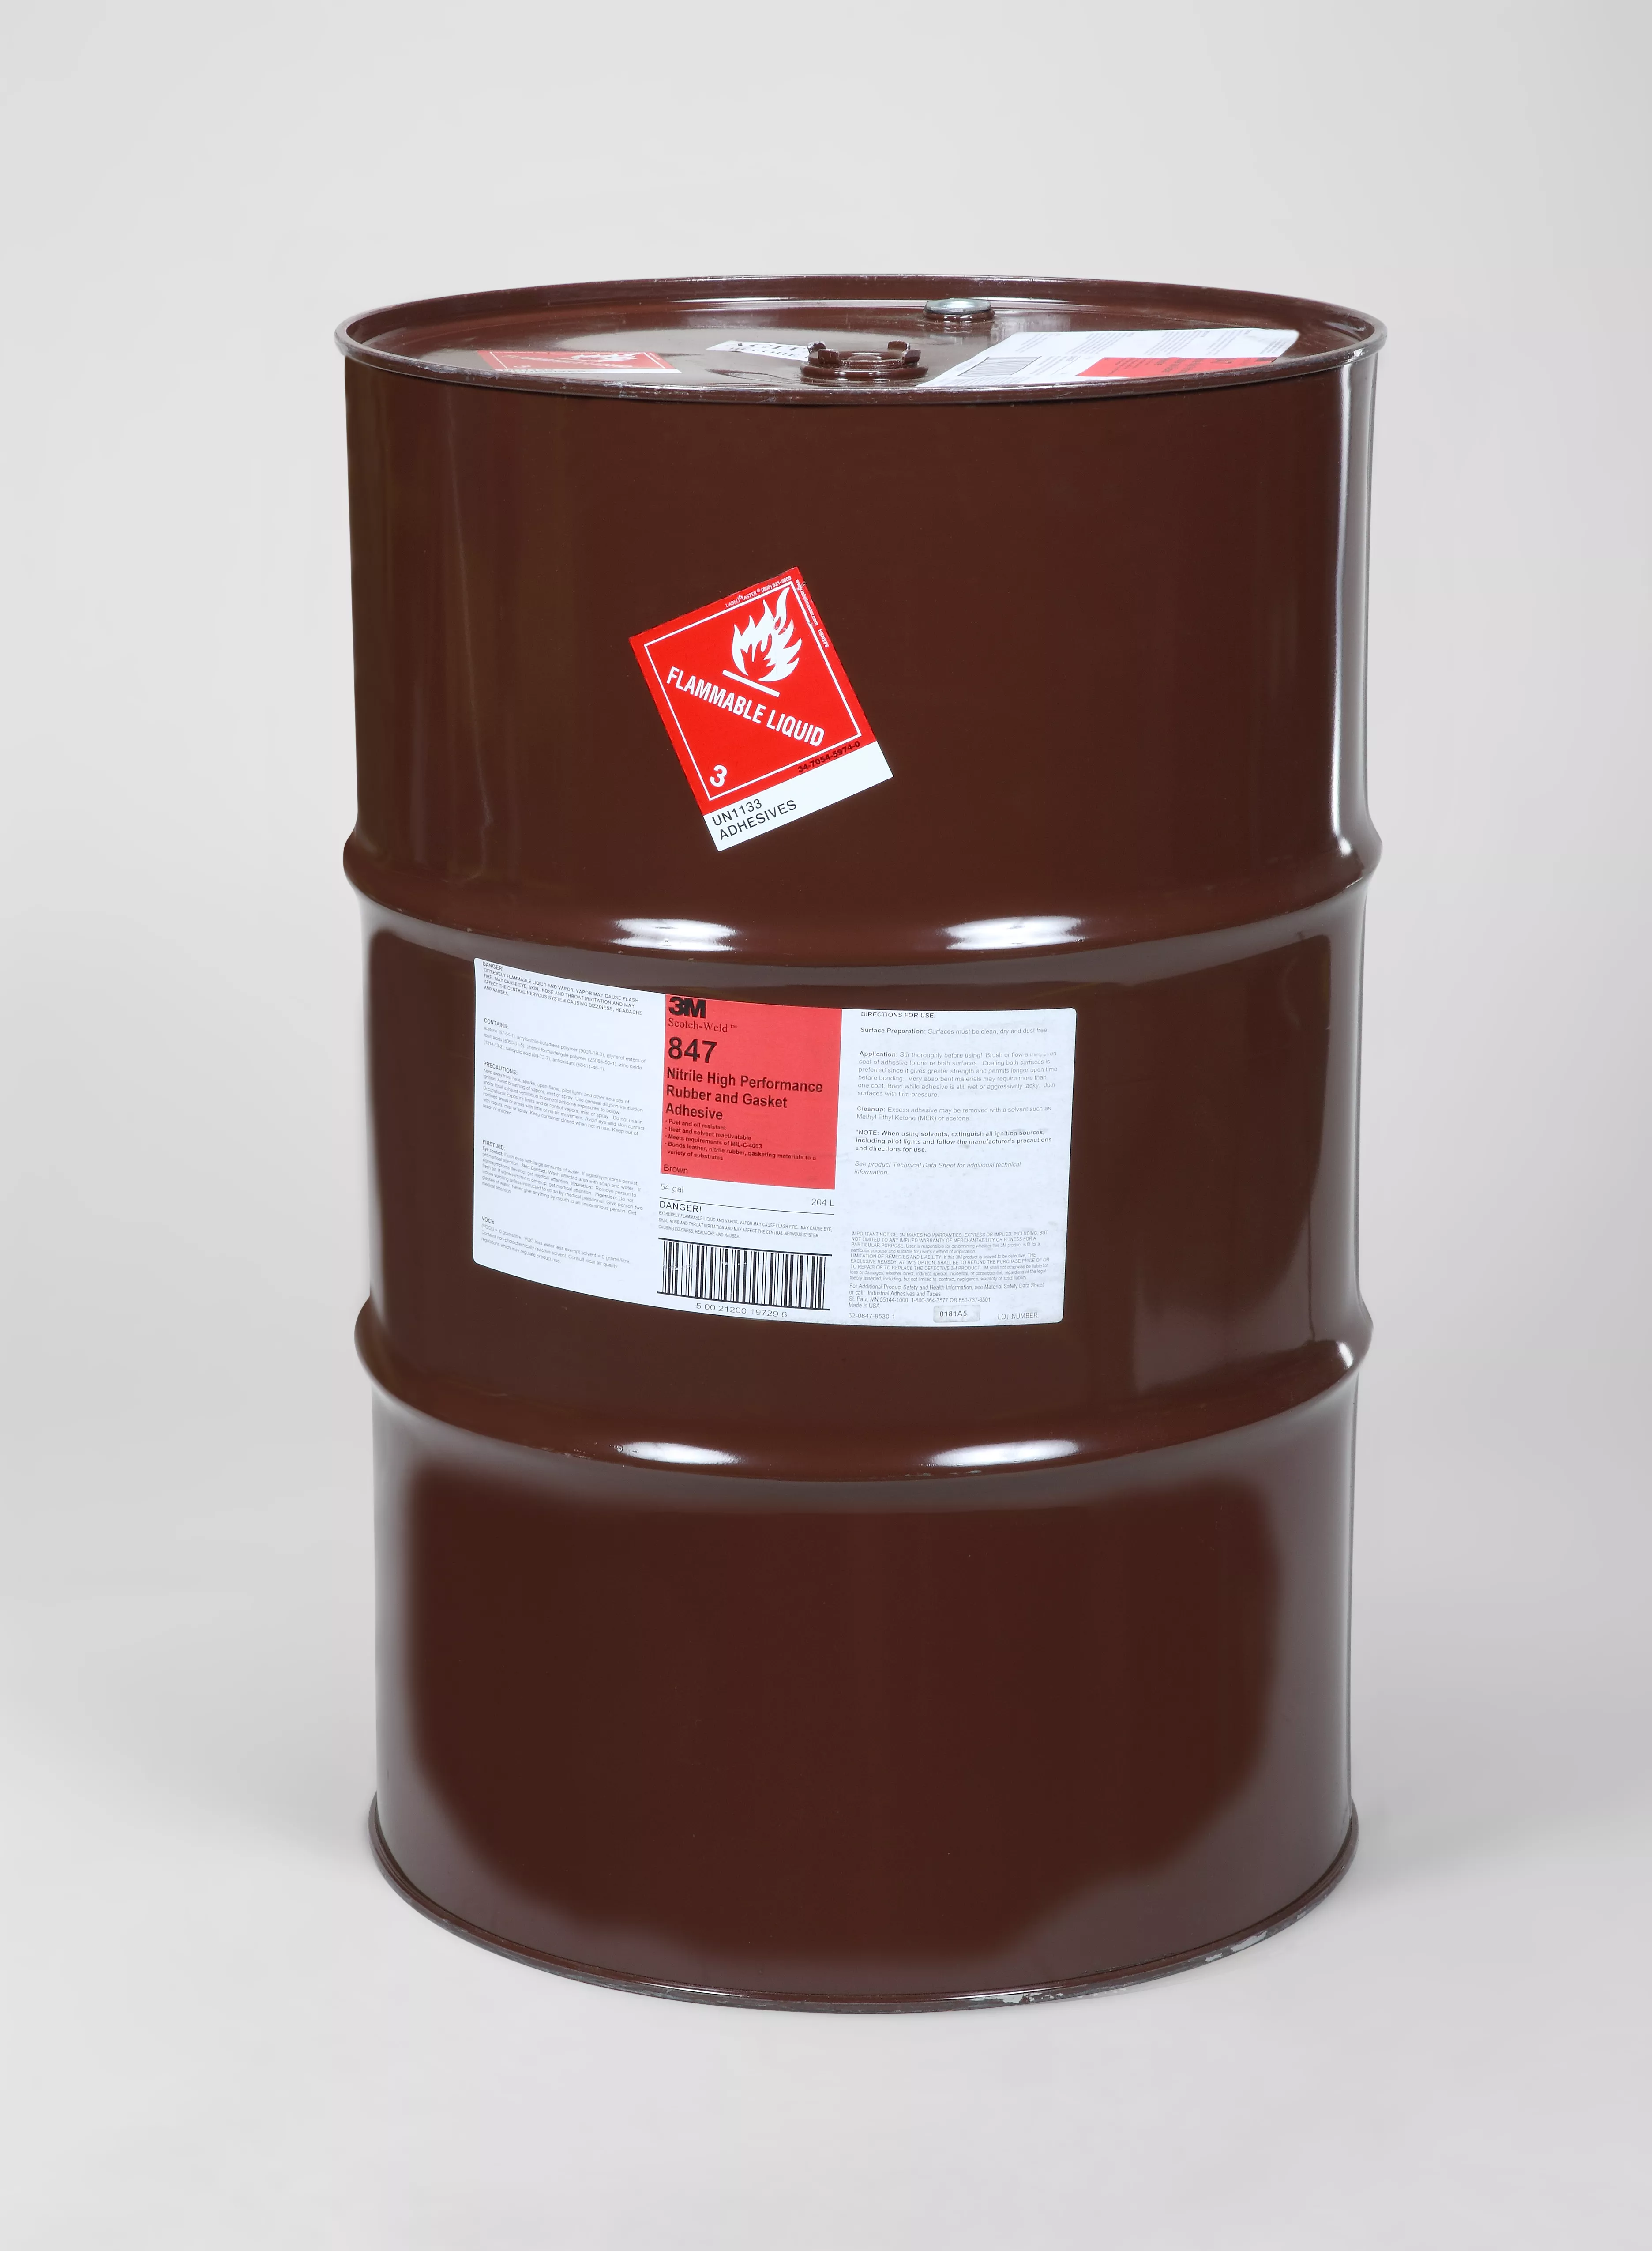 3M™ Nitrile High Performance Rubber and Gasket Adhesive 847, Brown, 55
Gallon Closed Head (54 Gallon Net), Drum